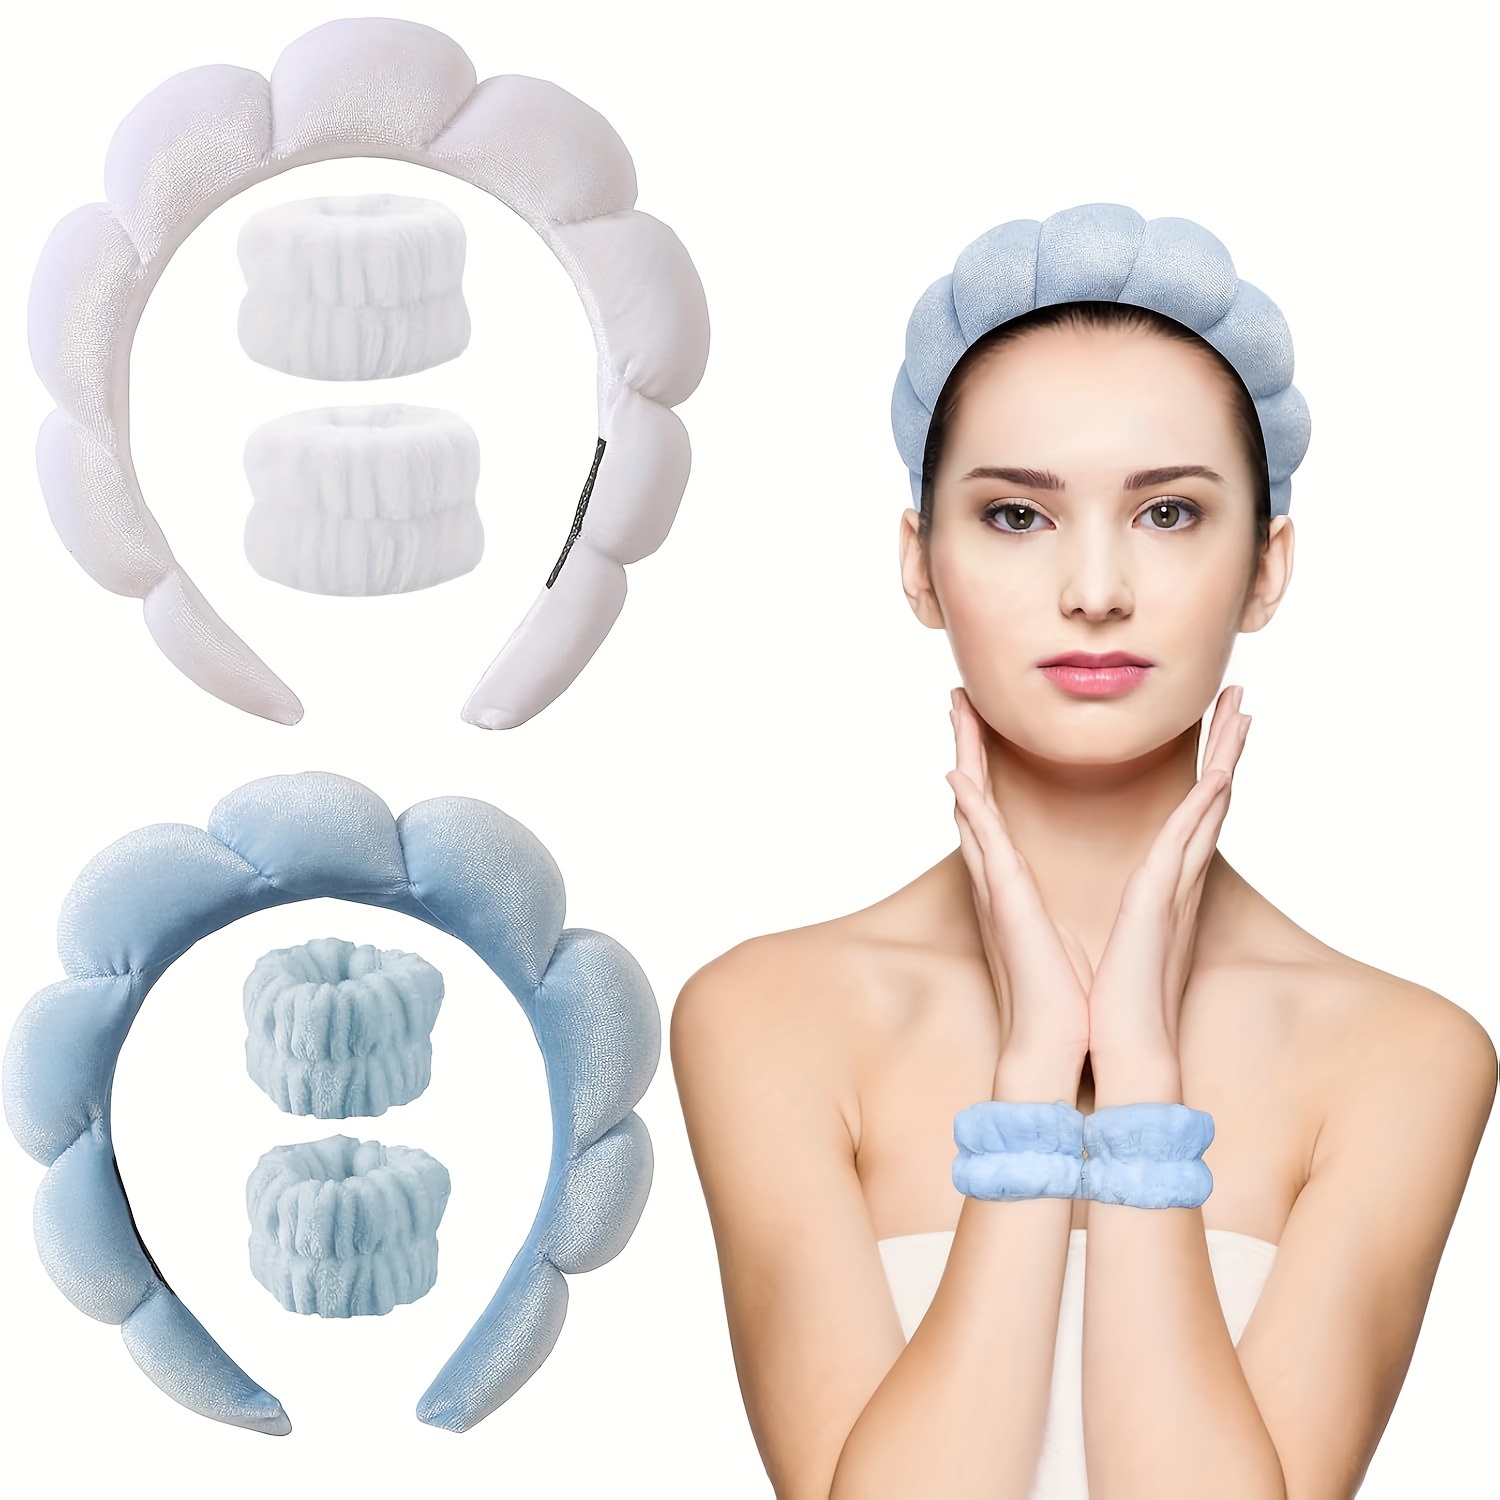 

3pc Solid Color Accessories Kit Cloud Shaped Non Slip Head Band Plush Hair Hoop Water Absorbent Wrist Band For Women And Girls Wear